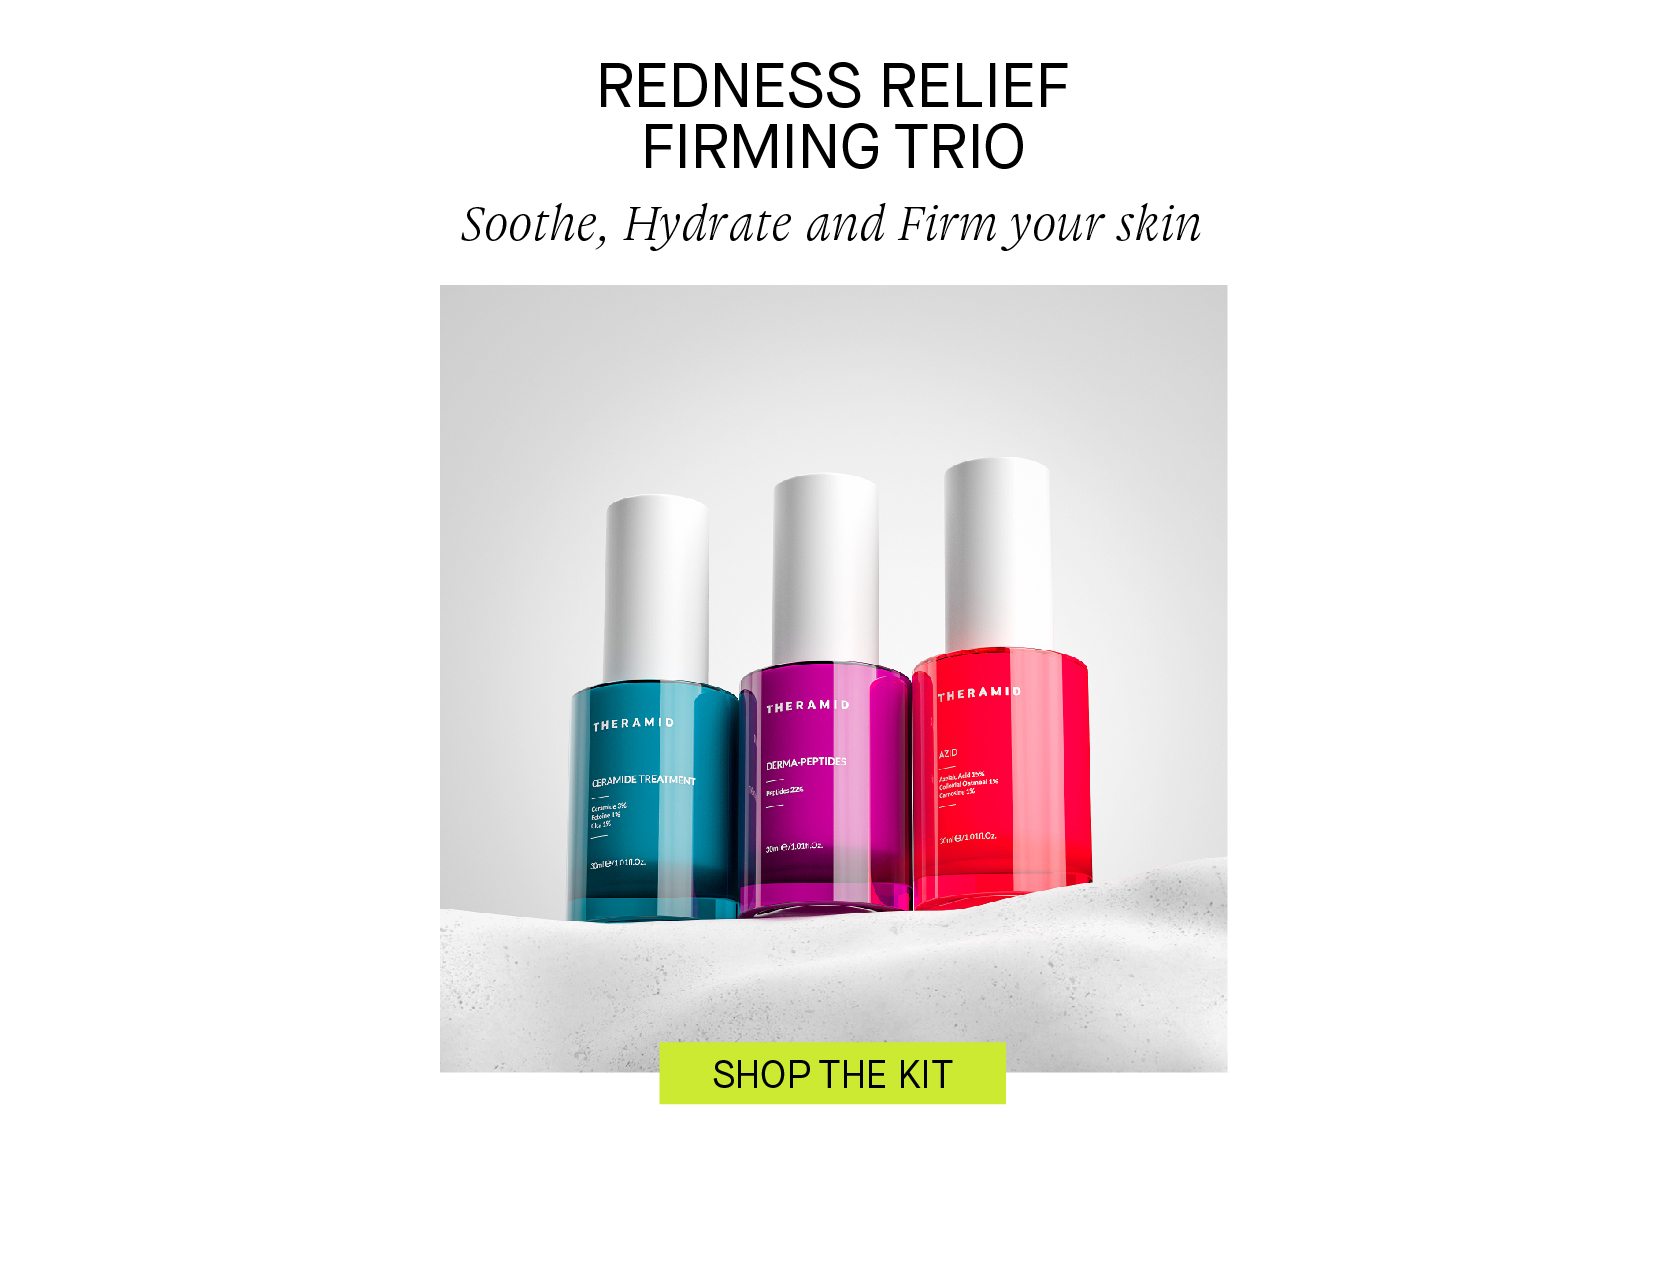 REDNESS RELIEF FIRMING TRIO Soothe, Hydrate and Firm your skin 